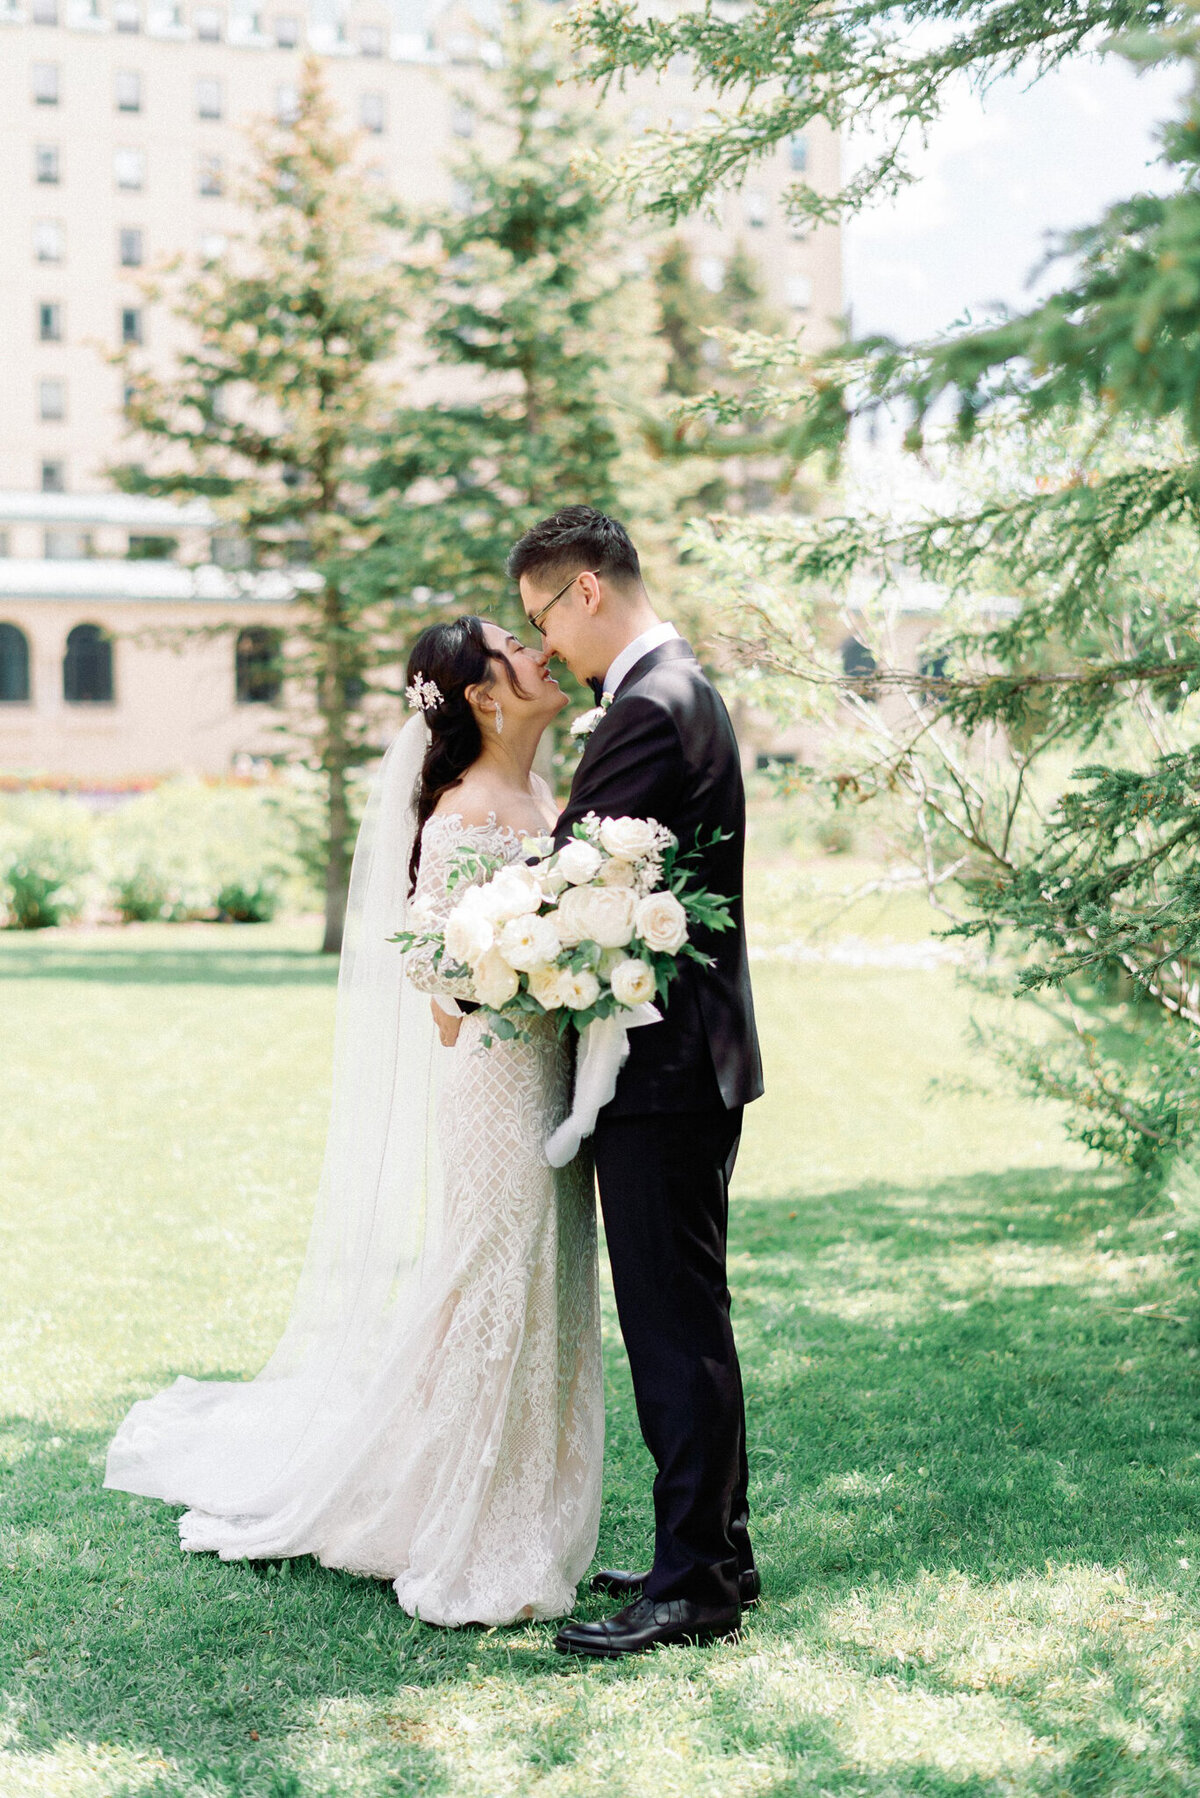 Elegant and romantic bride and groom portrait by Kaity Body Photography, elegant film inspired wedding photographer in Calgary, Alberta. Featured on the Bronte Bride Vendor Guide.